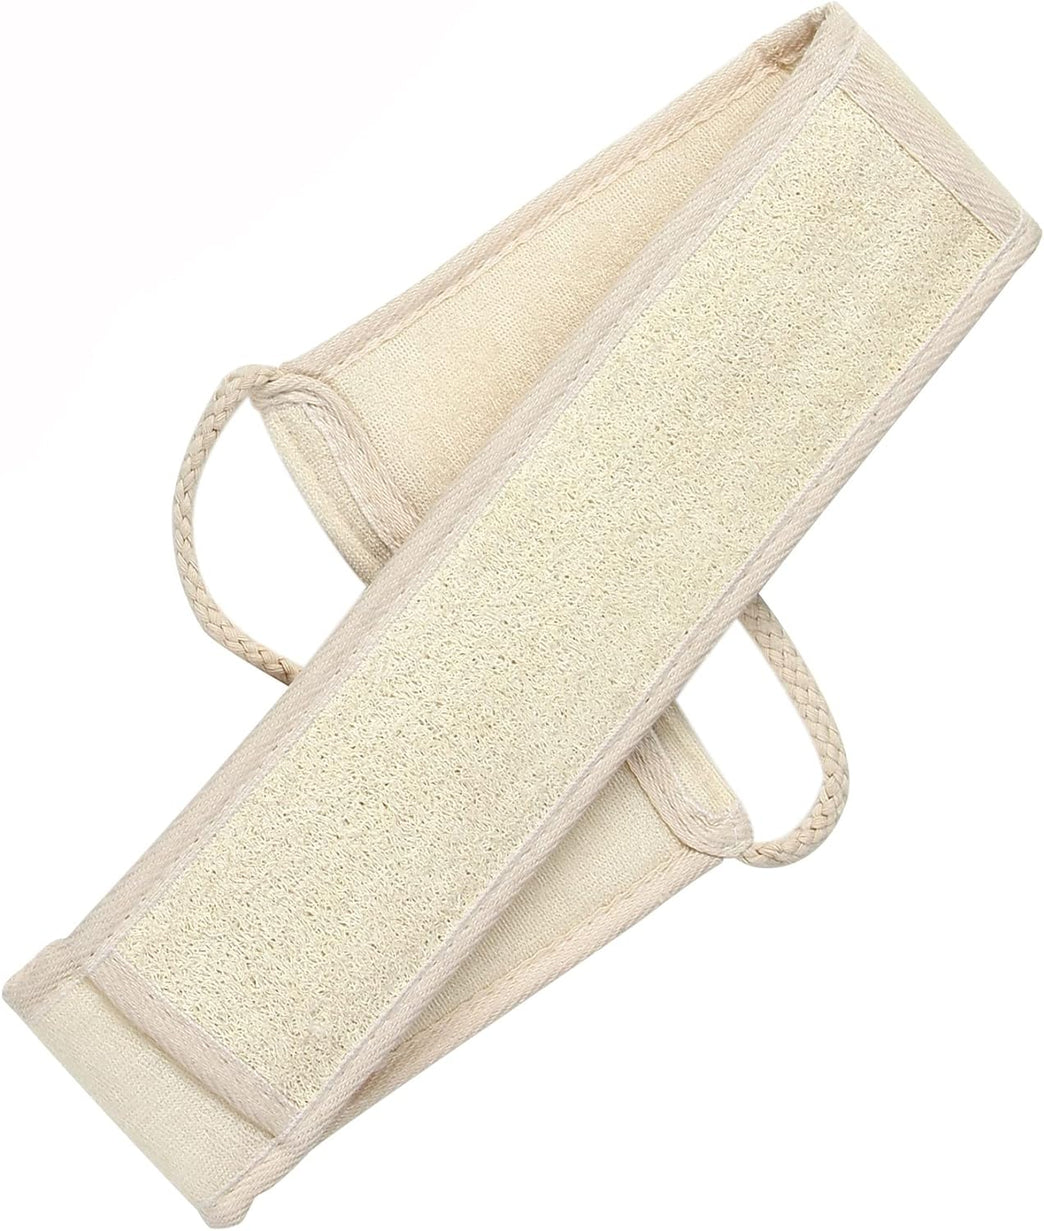 Exfoliating Loofah Back Scrubber for Shower, Long Handled Bath Brush with Dual Scrubbing Straps